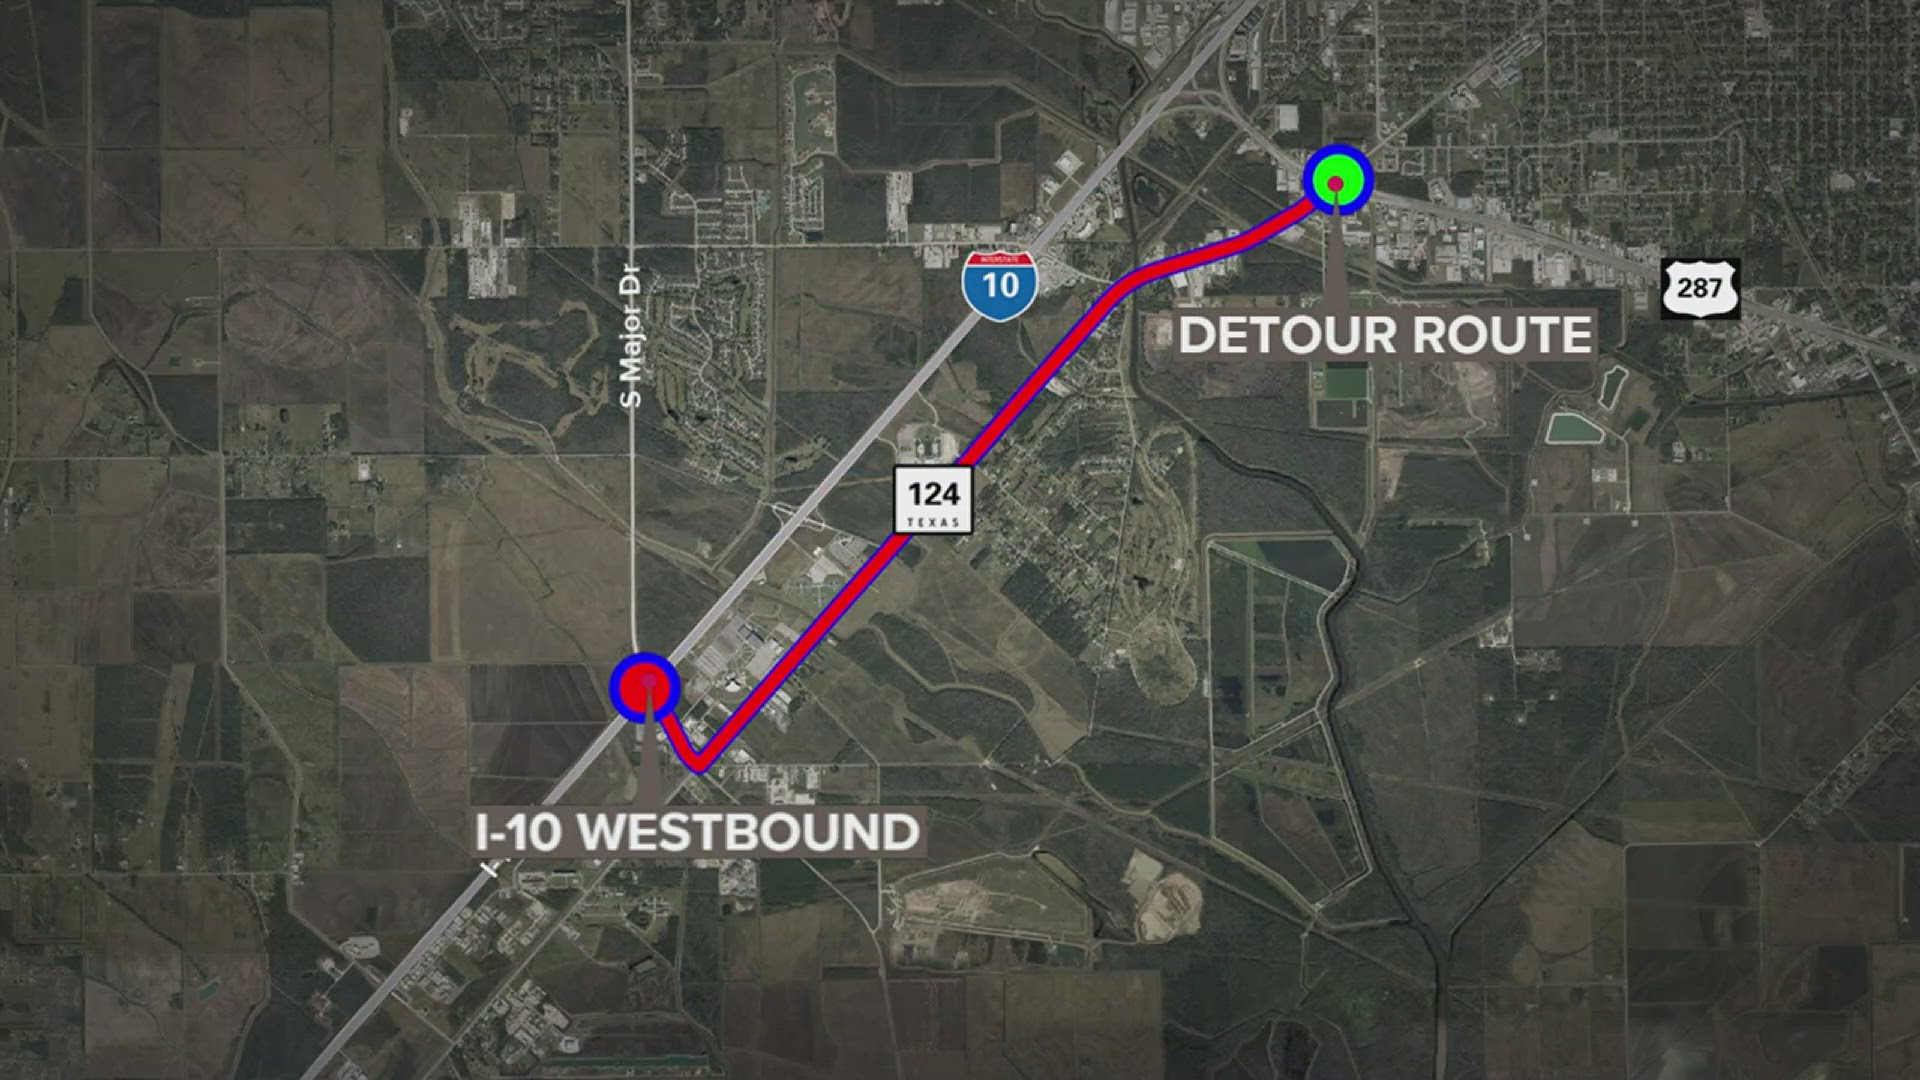 Starting in Monday, April 22, the U.S. Highway 69 northbound connector to IH-10 westbound will be closed for two weeks.